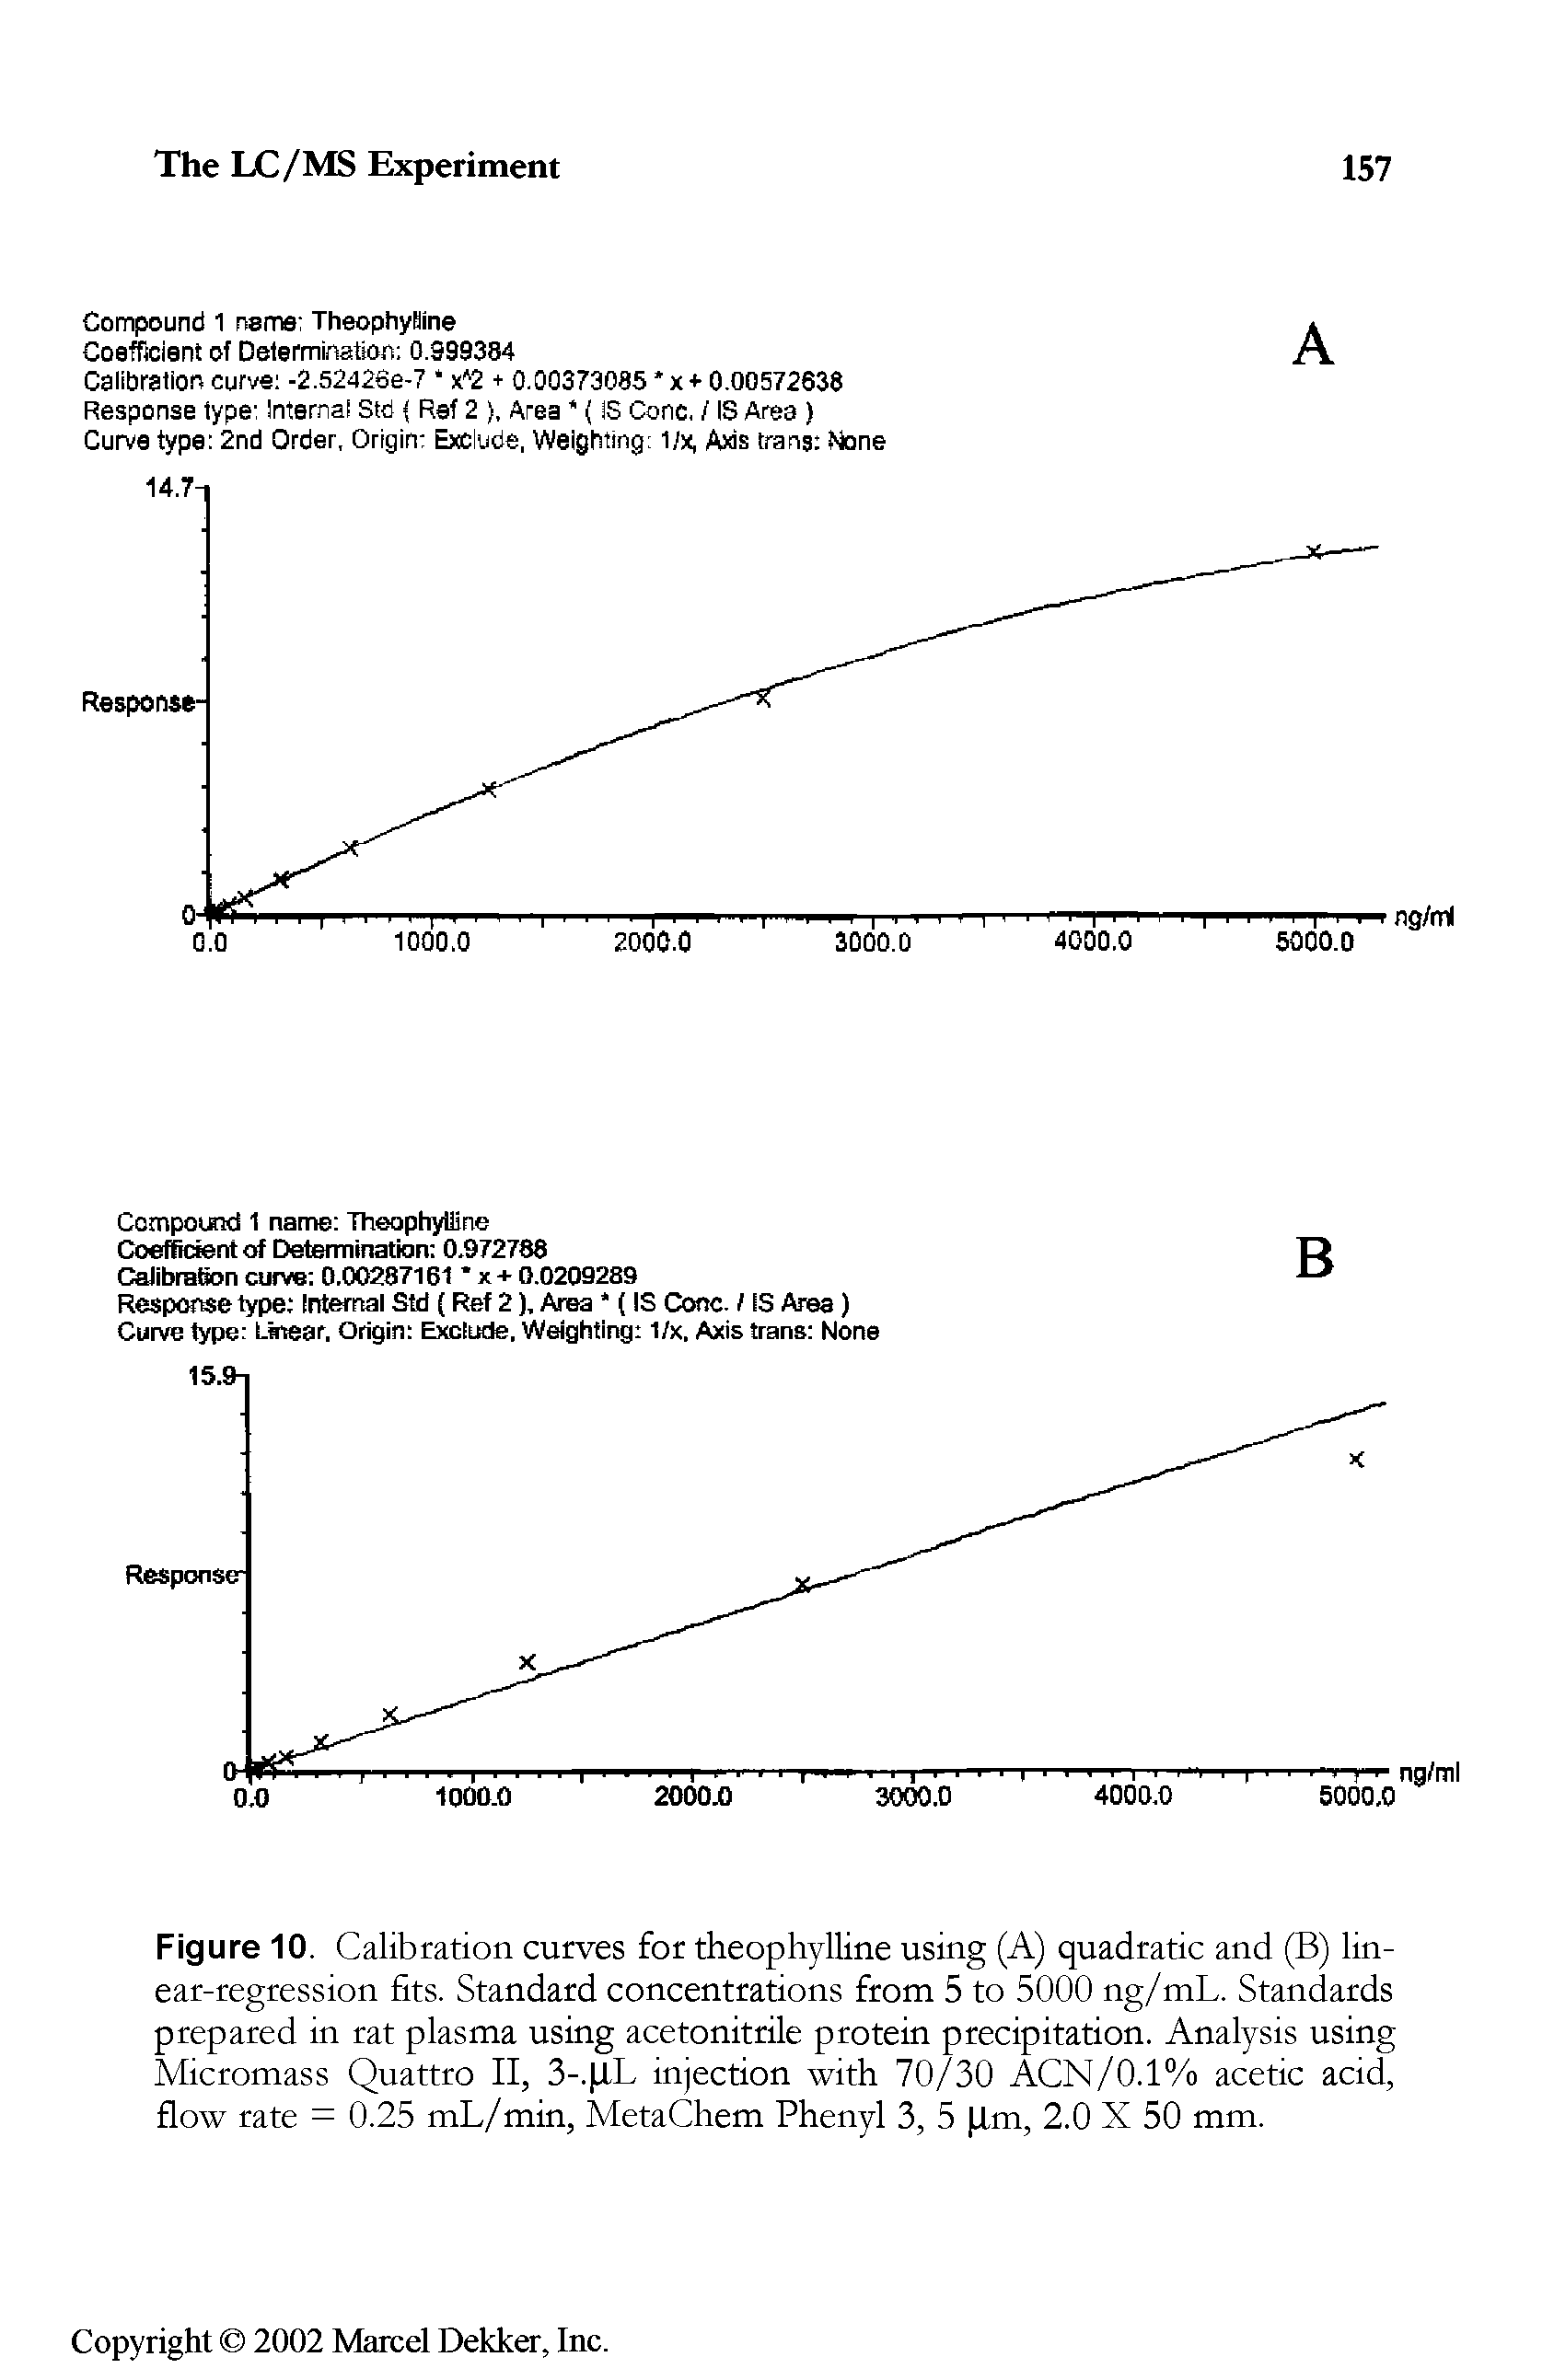 Figure 10. Calibration curves for theophylline using (A) quadratic and (B) linear-regression fits. Standard concentrations from 5 to 5000 ng/mL. Standards prepared in rat plasma using acetonitrile protein precipitation. Analysis using Micromass Quattro II, 3-. I,L injection with 70/30 ACN/0.1% acetic acid, flow rate = 0.25 mL/min, MetaChem Phenyl 3, 5 Im, 2.0 X 50 mm.